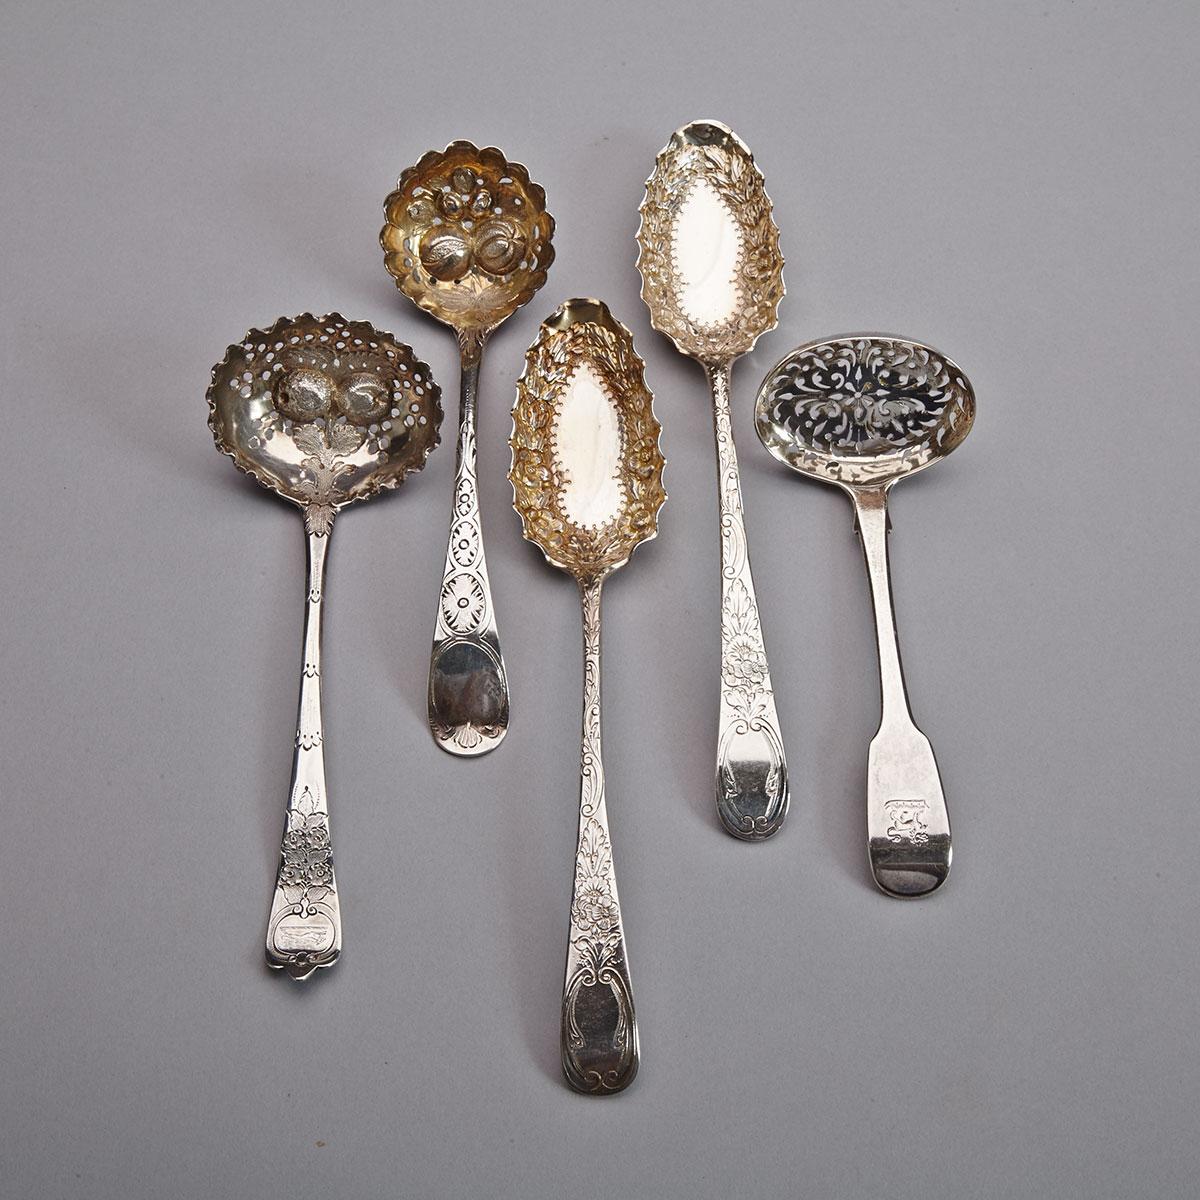 Two Georgian Silver Berry Spoons and Three Sugar Sifting Ladles, London, 1724-1831